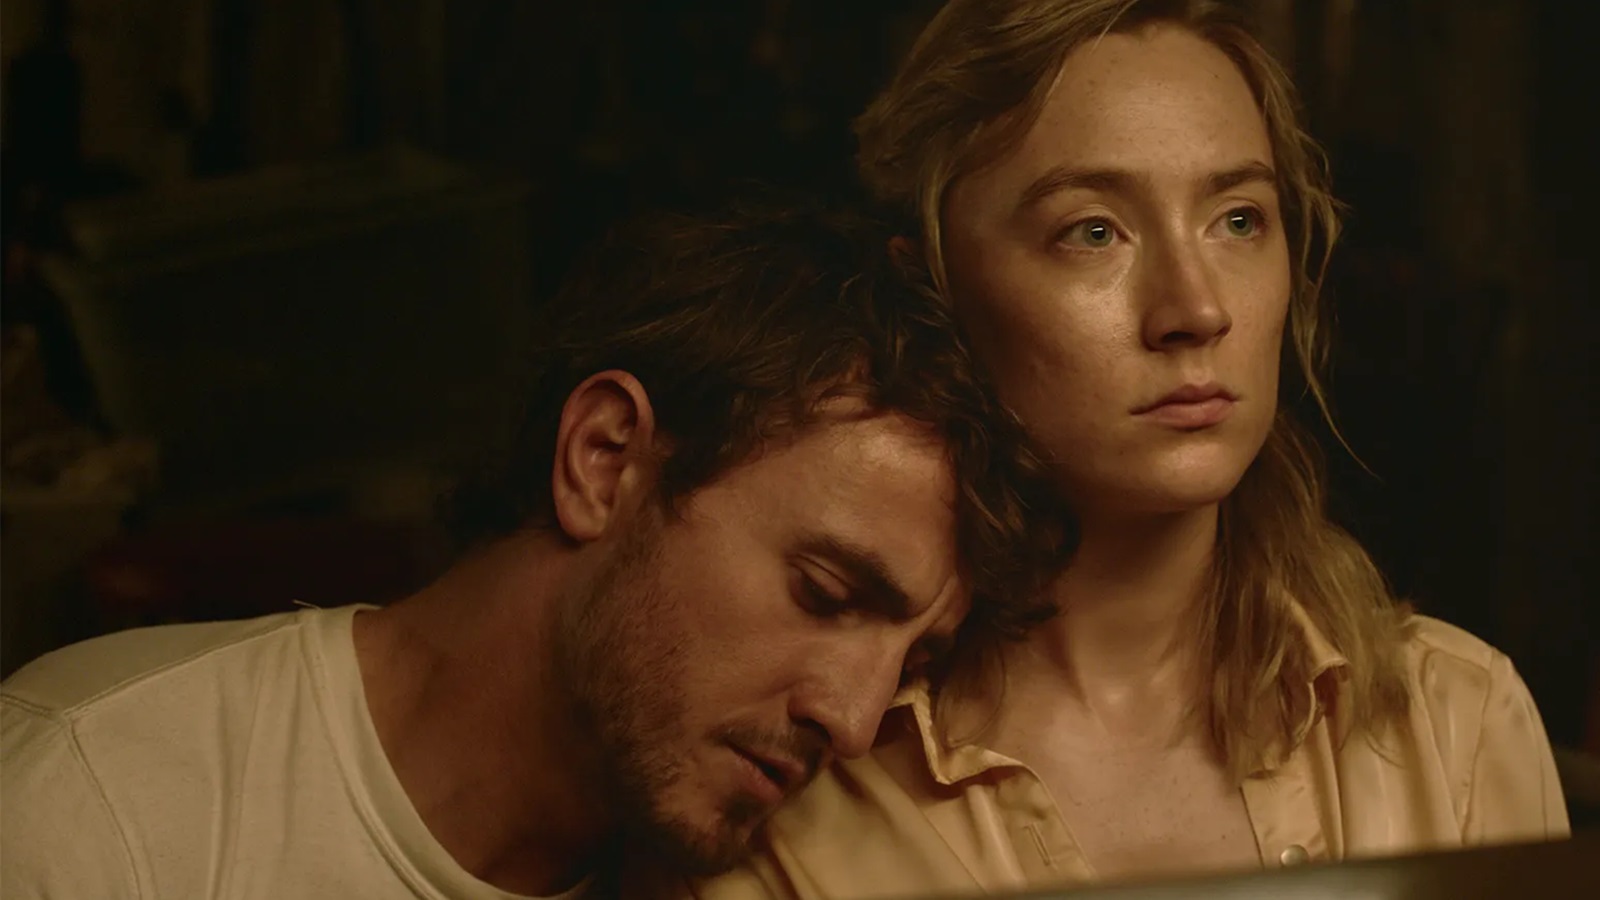 Saoirse Ronan: 'I knew Paul Mescal would become a star with sausage commercials'